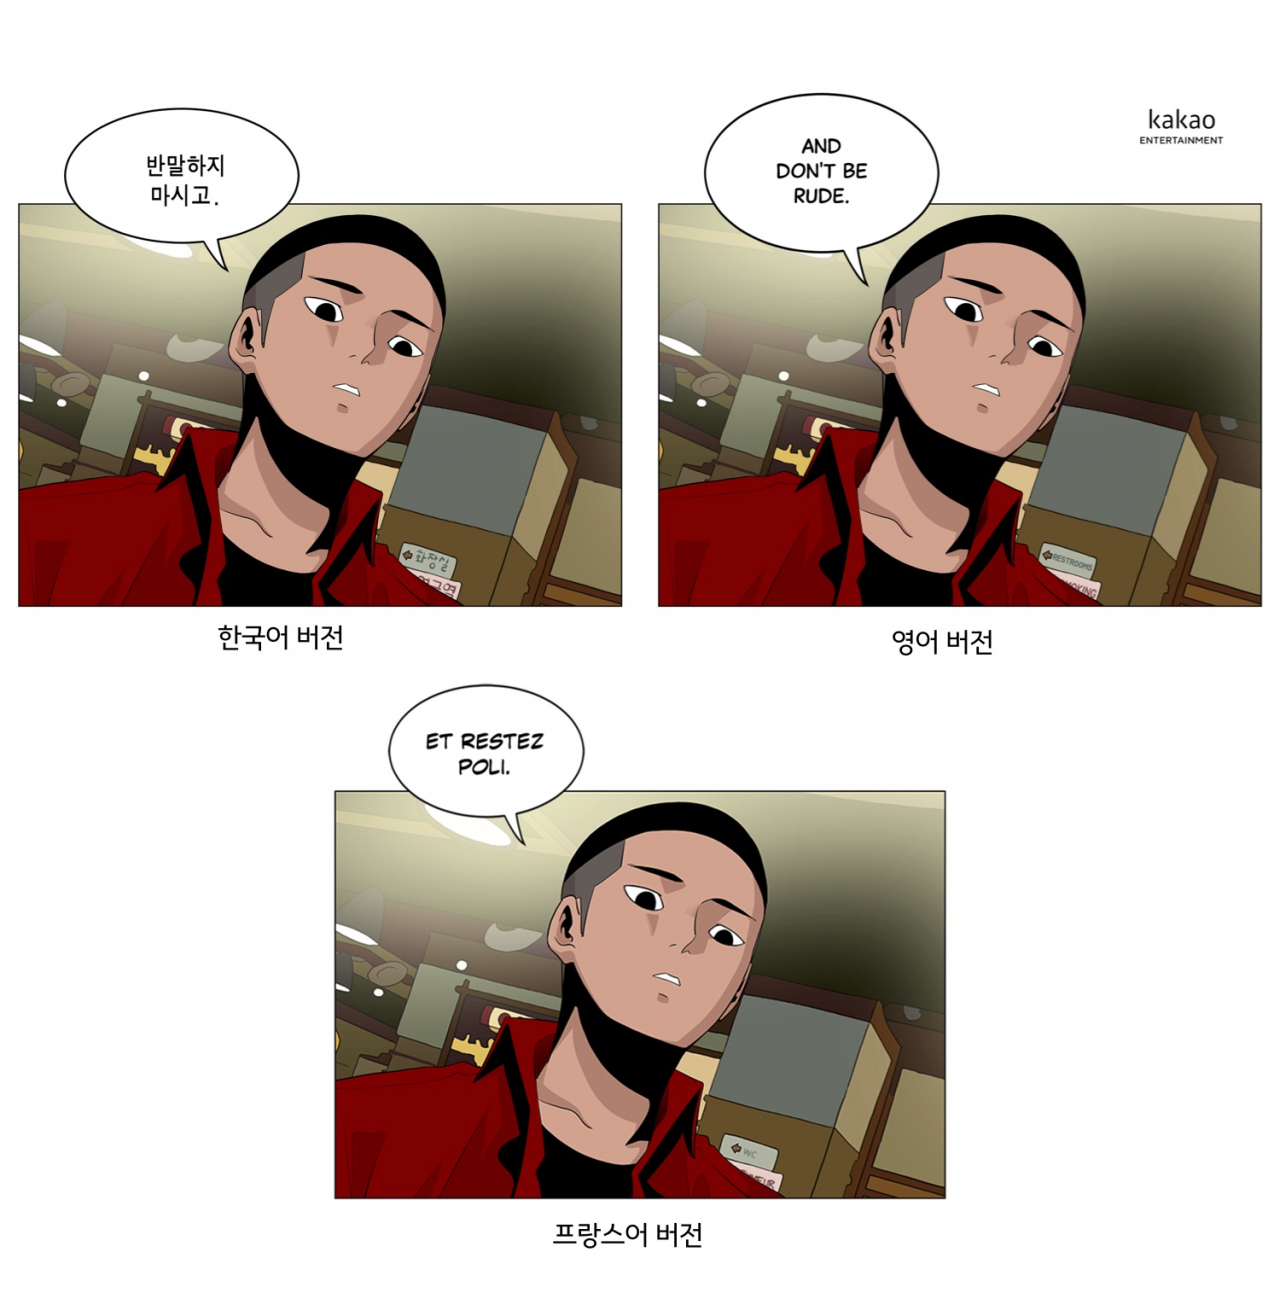 A panel from “Itaewon Class” is presented in three different languages with nuanced differences in the phrases used. (Kakao Entertainment)